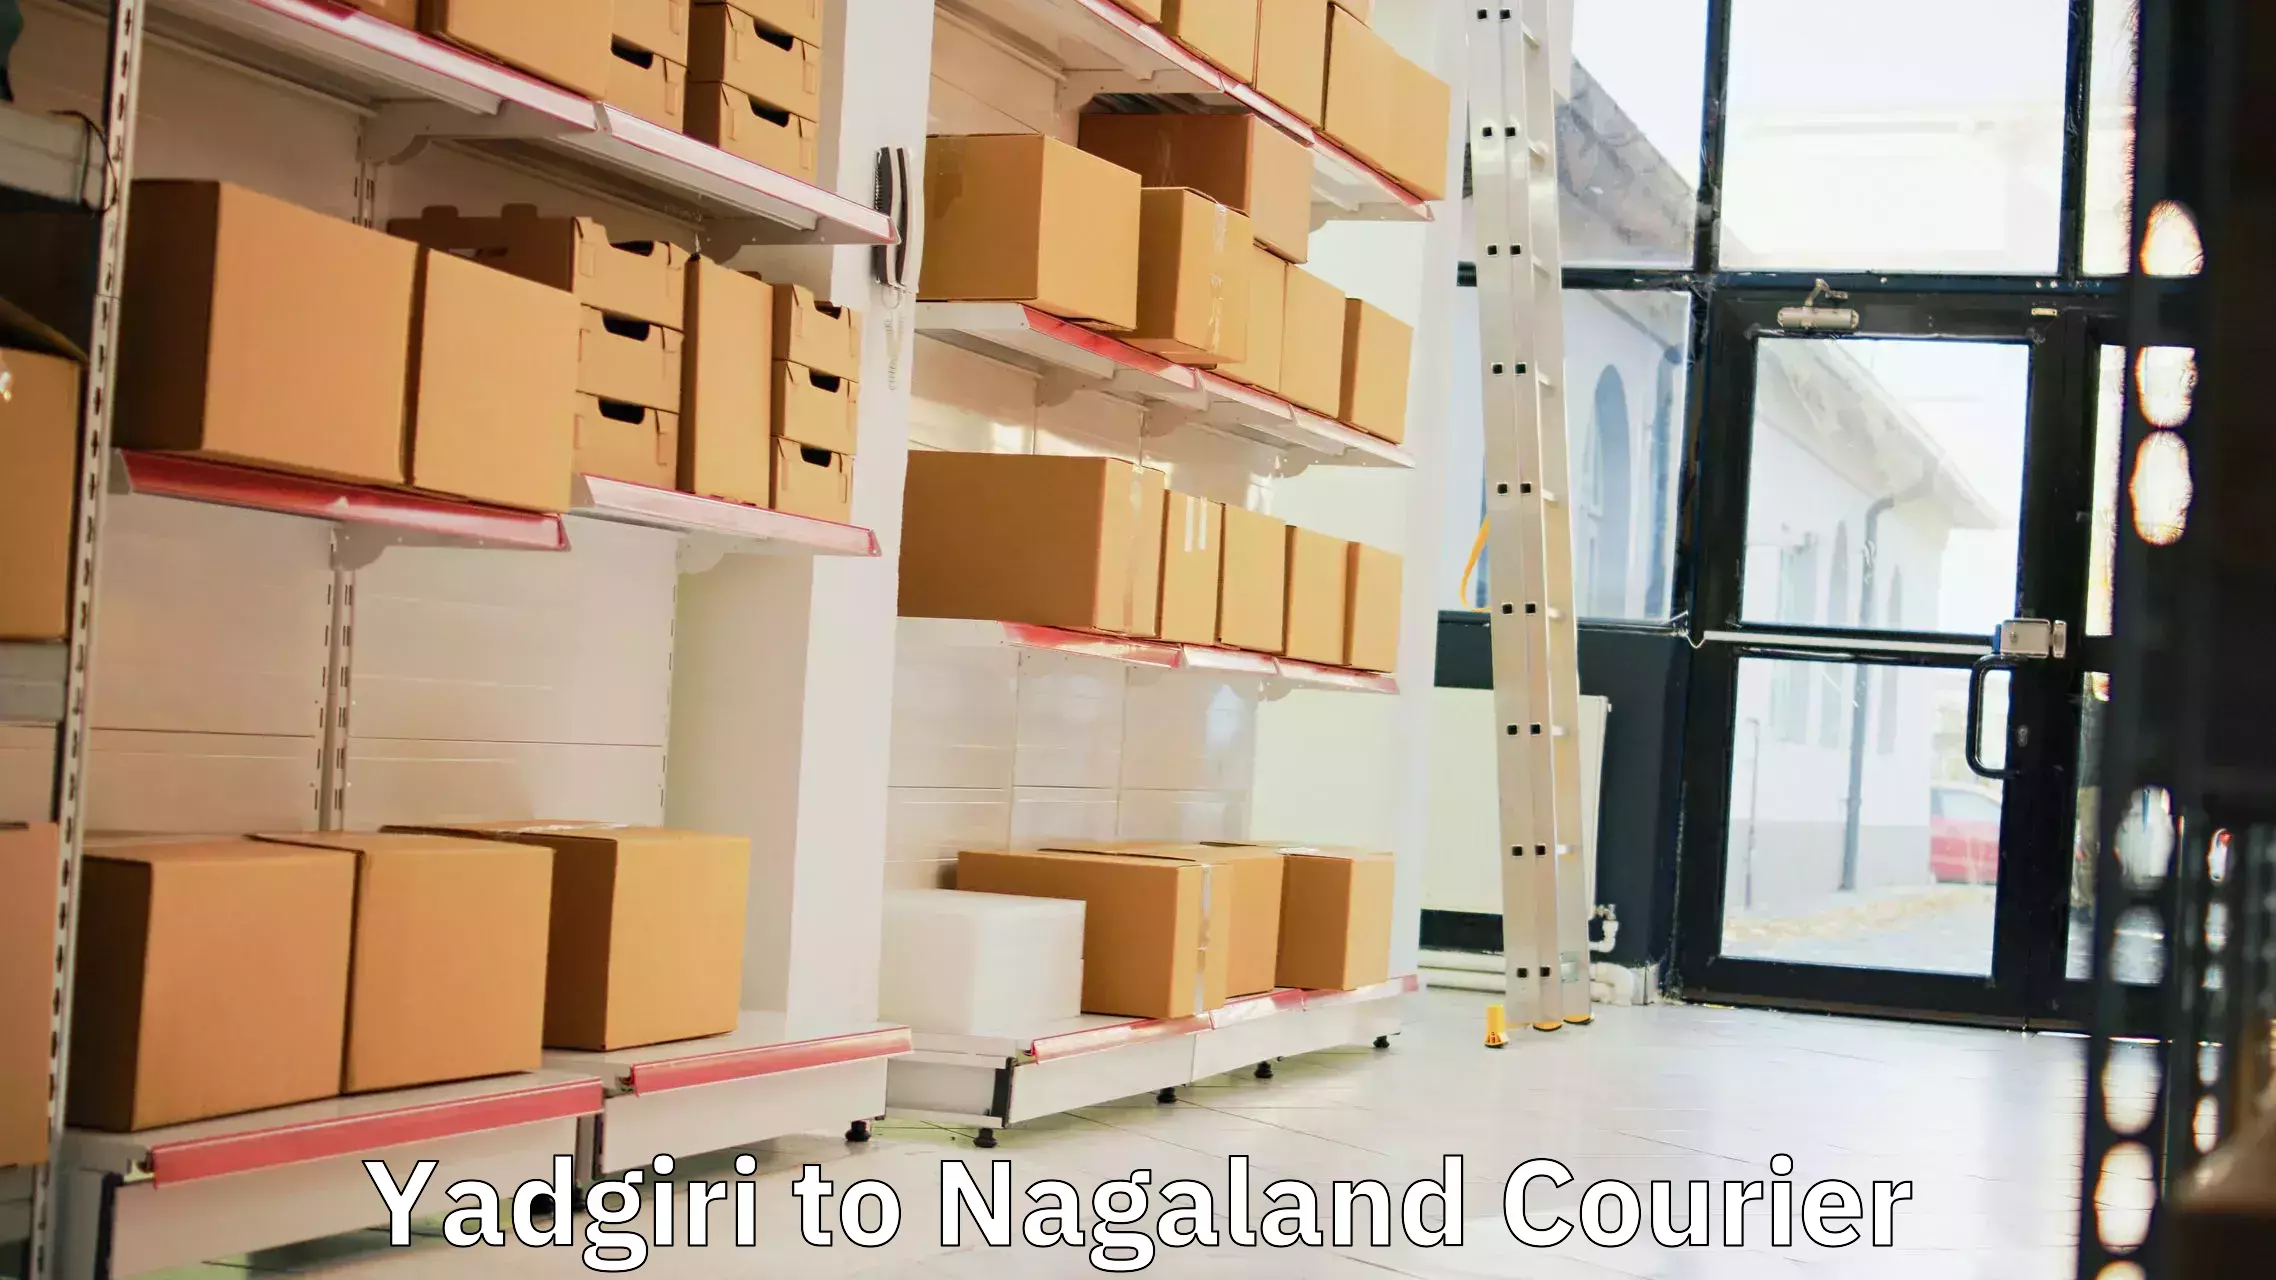 Optimized delivery routes Yadgiri to Nagaland